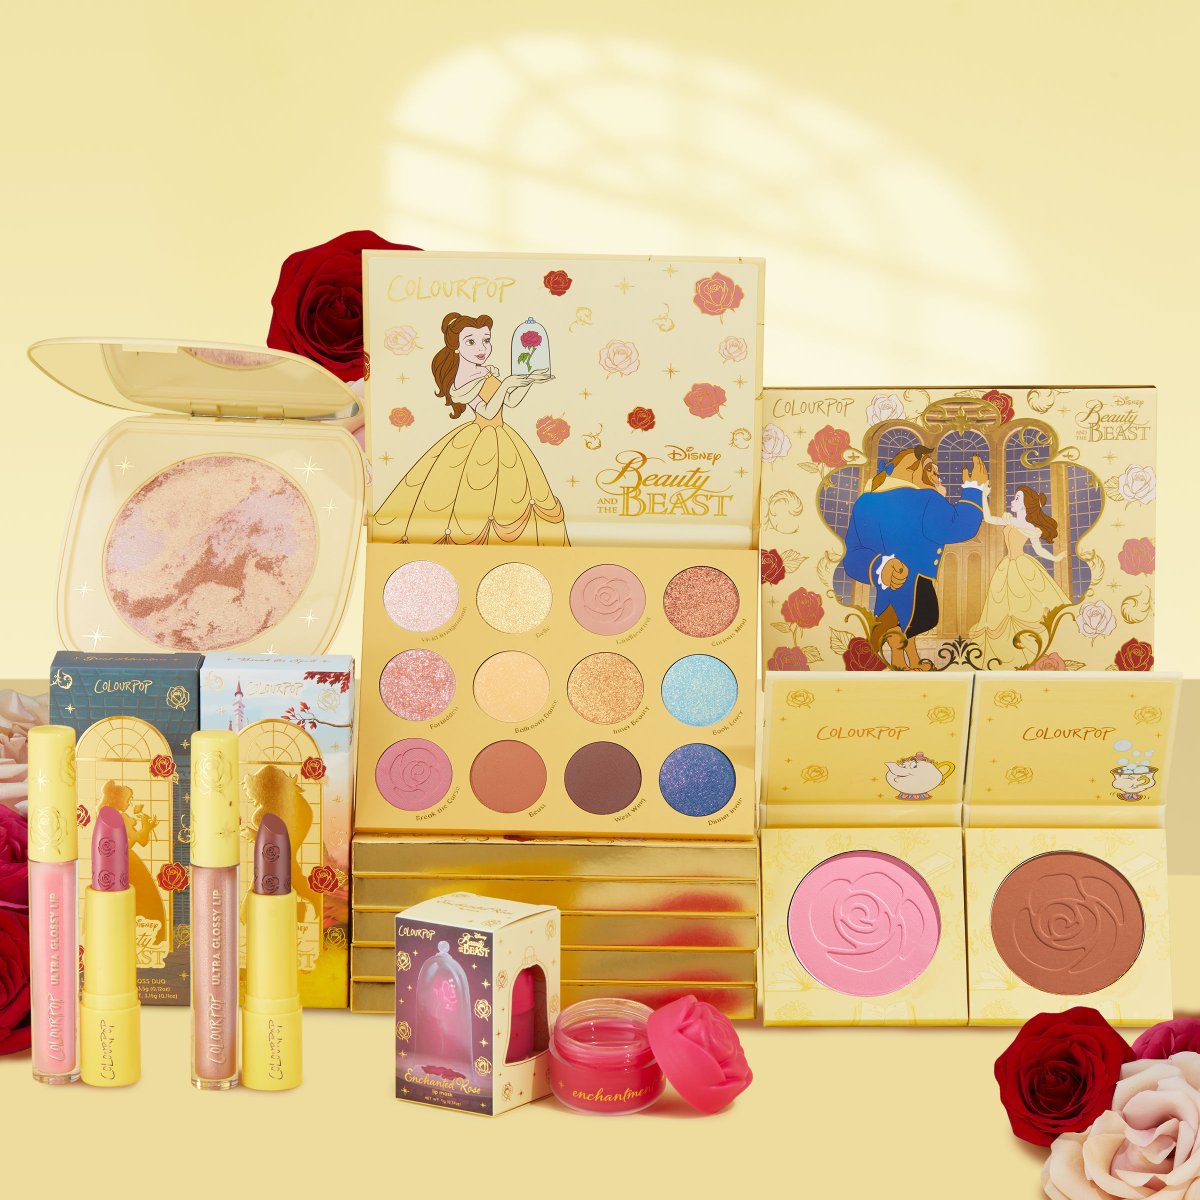 She’s a beauty… 🌹🫖✨ The Disney Beauty and the Beast and ColourPop collection is now exclusively AVAILABLE NOW on colourpop.com! #DisneyandColourPop #DisneyBeautyandtheBeast